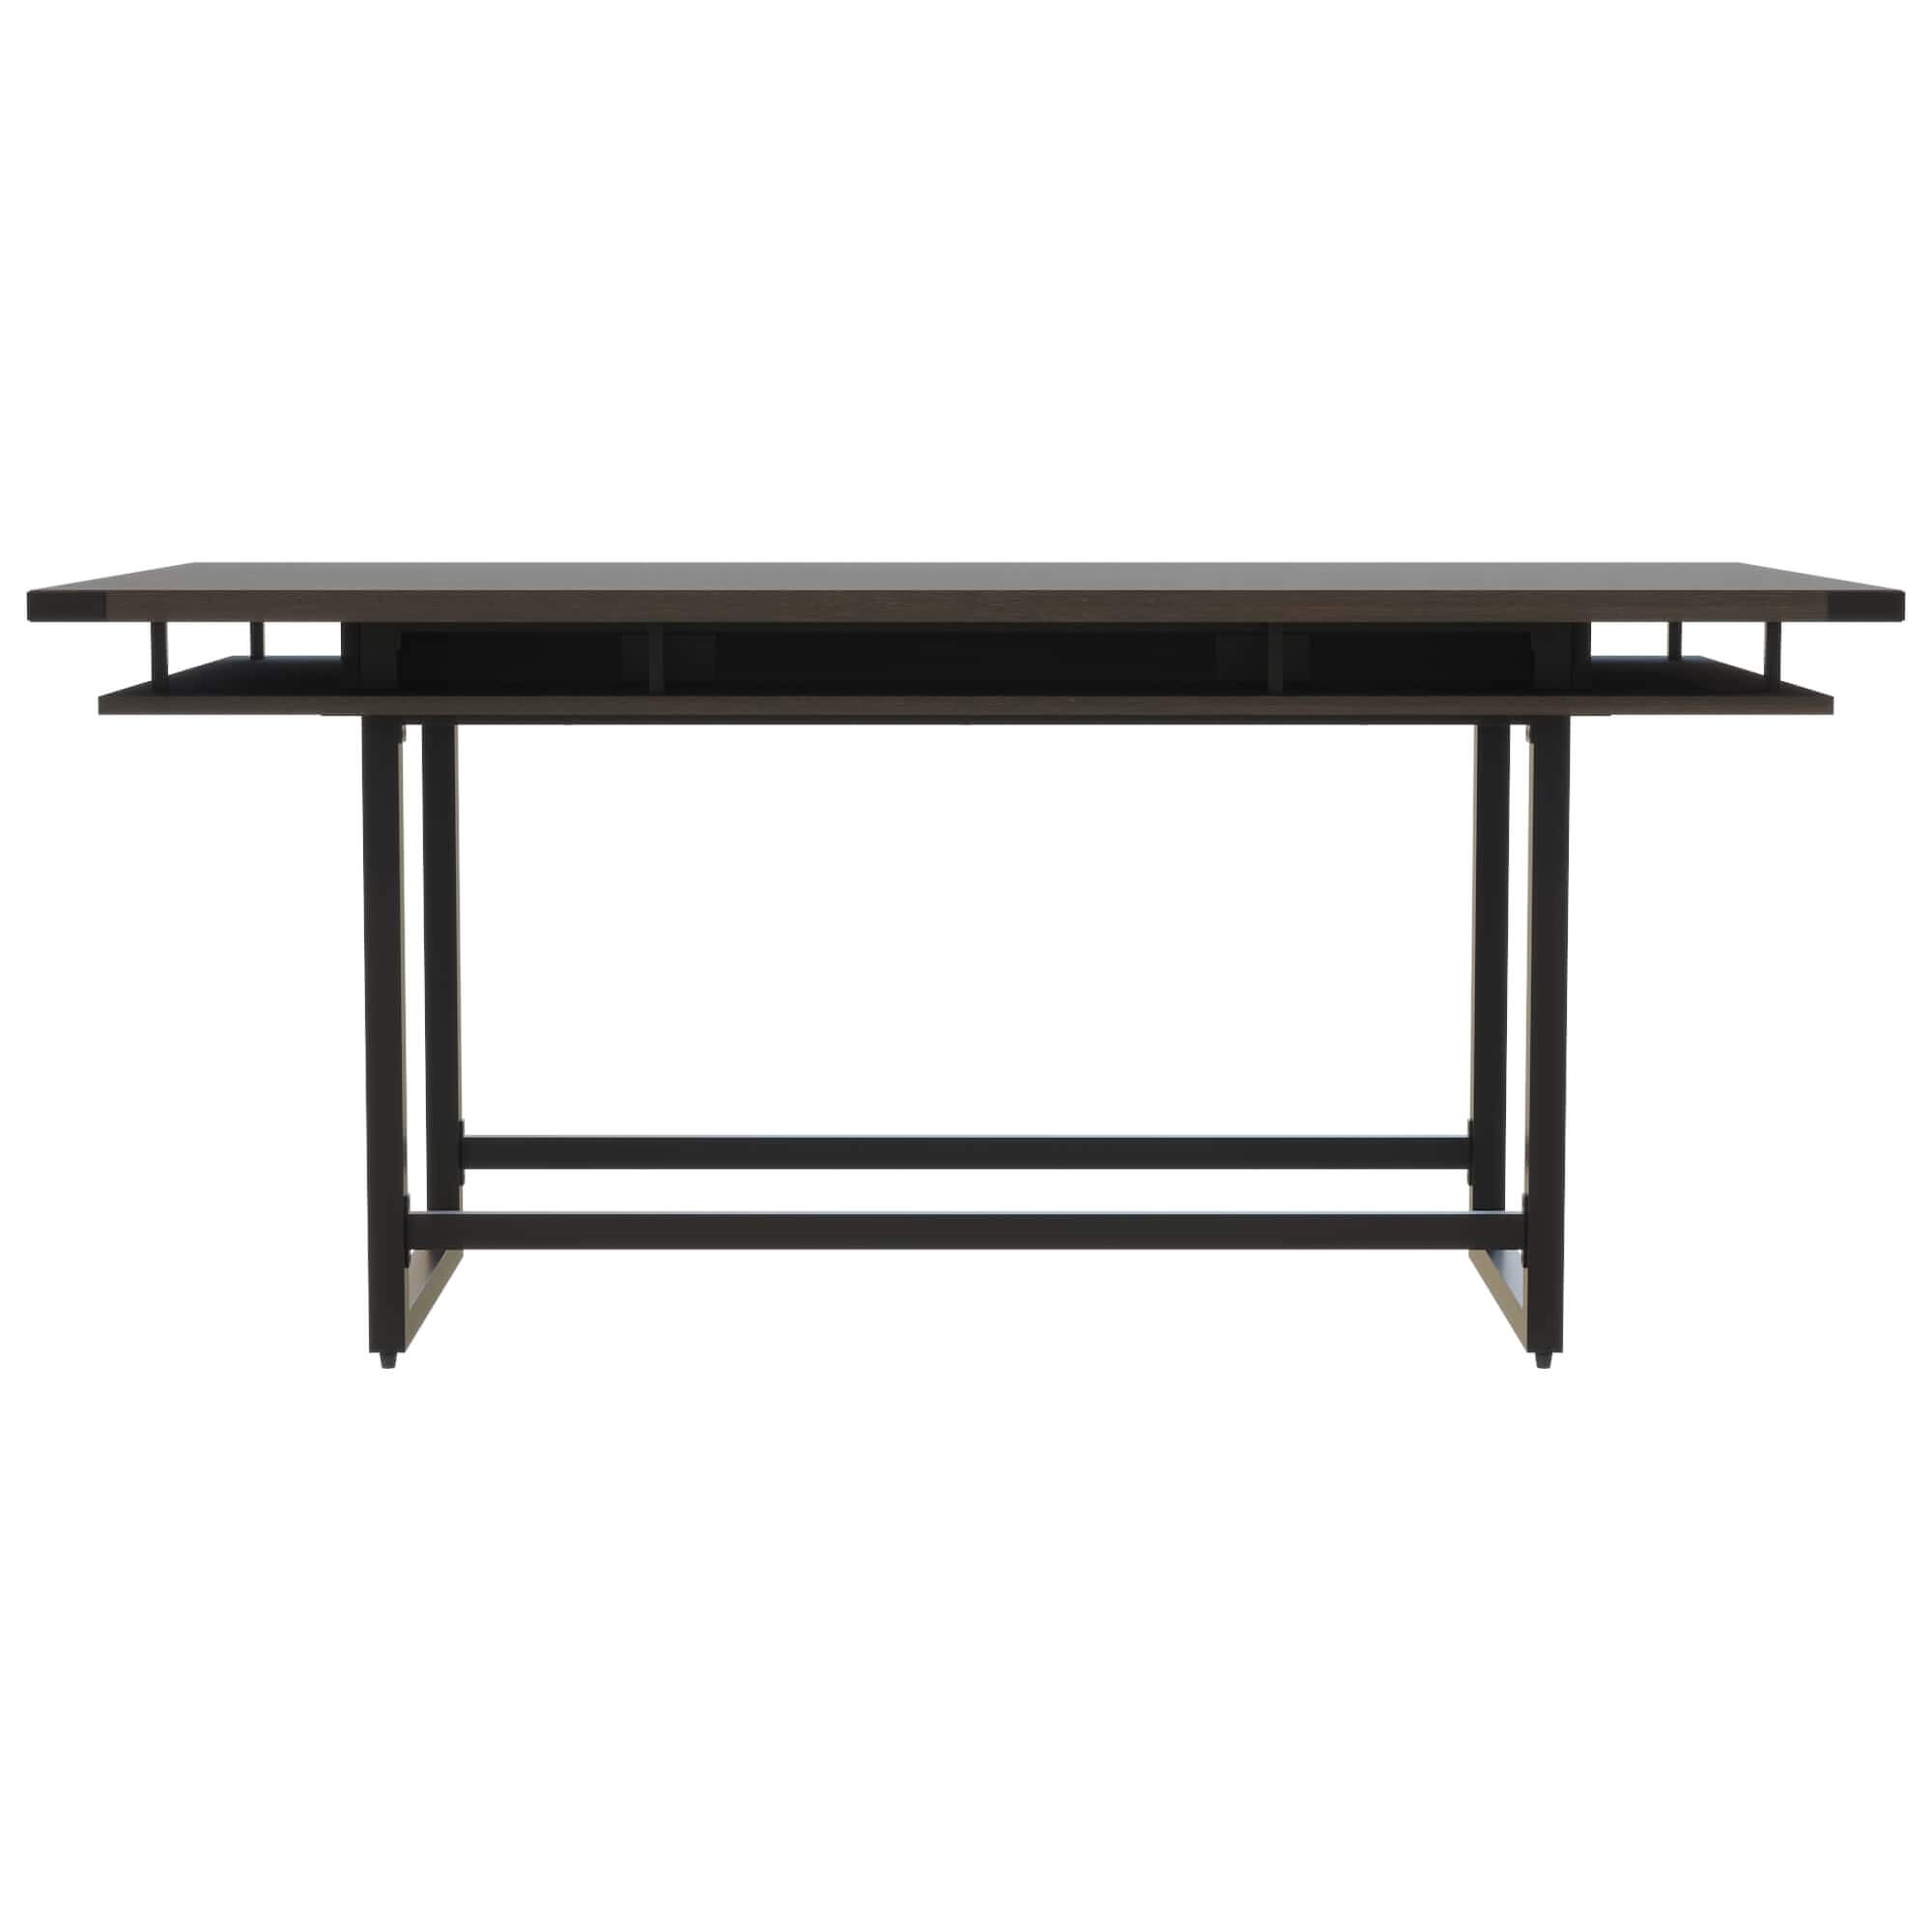 Conference tables CUB MRCH8STO FAS front